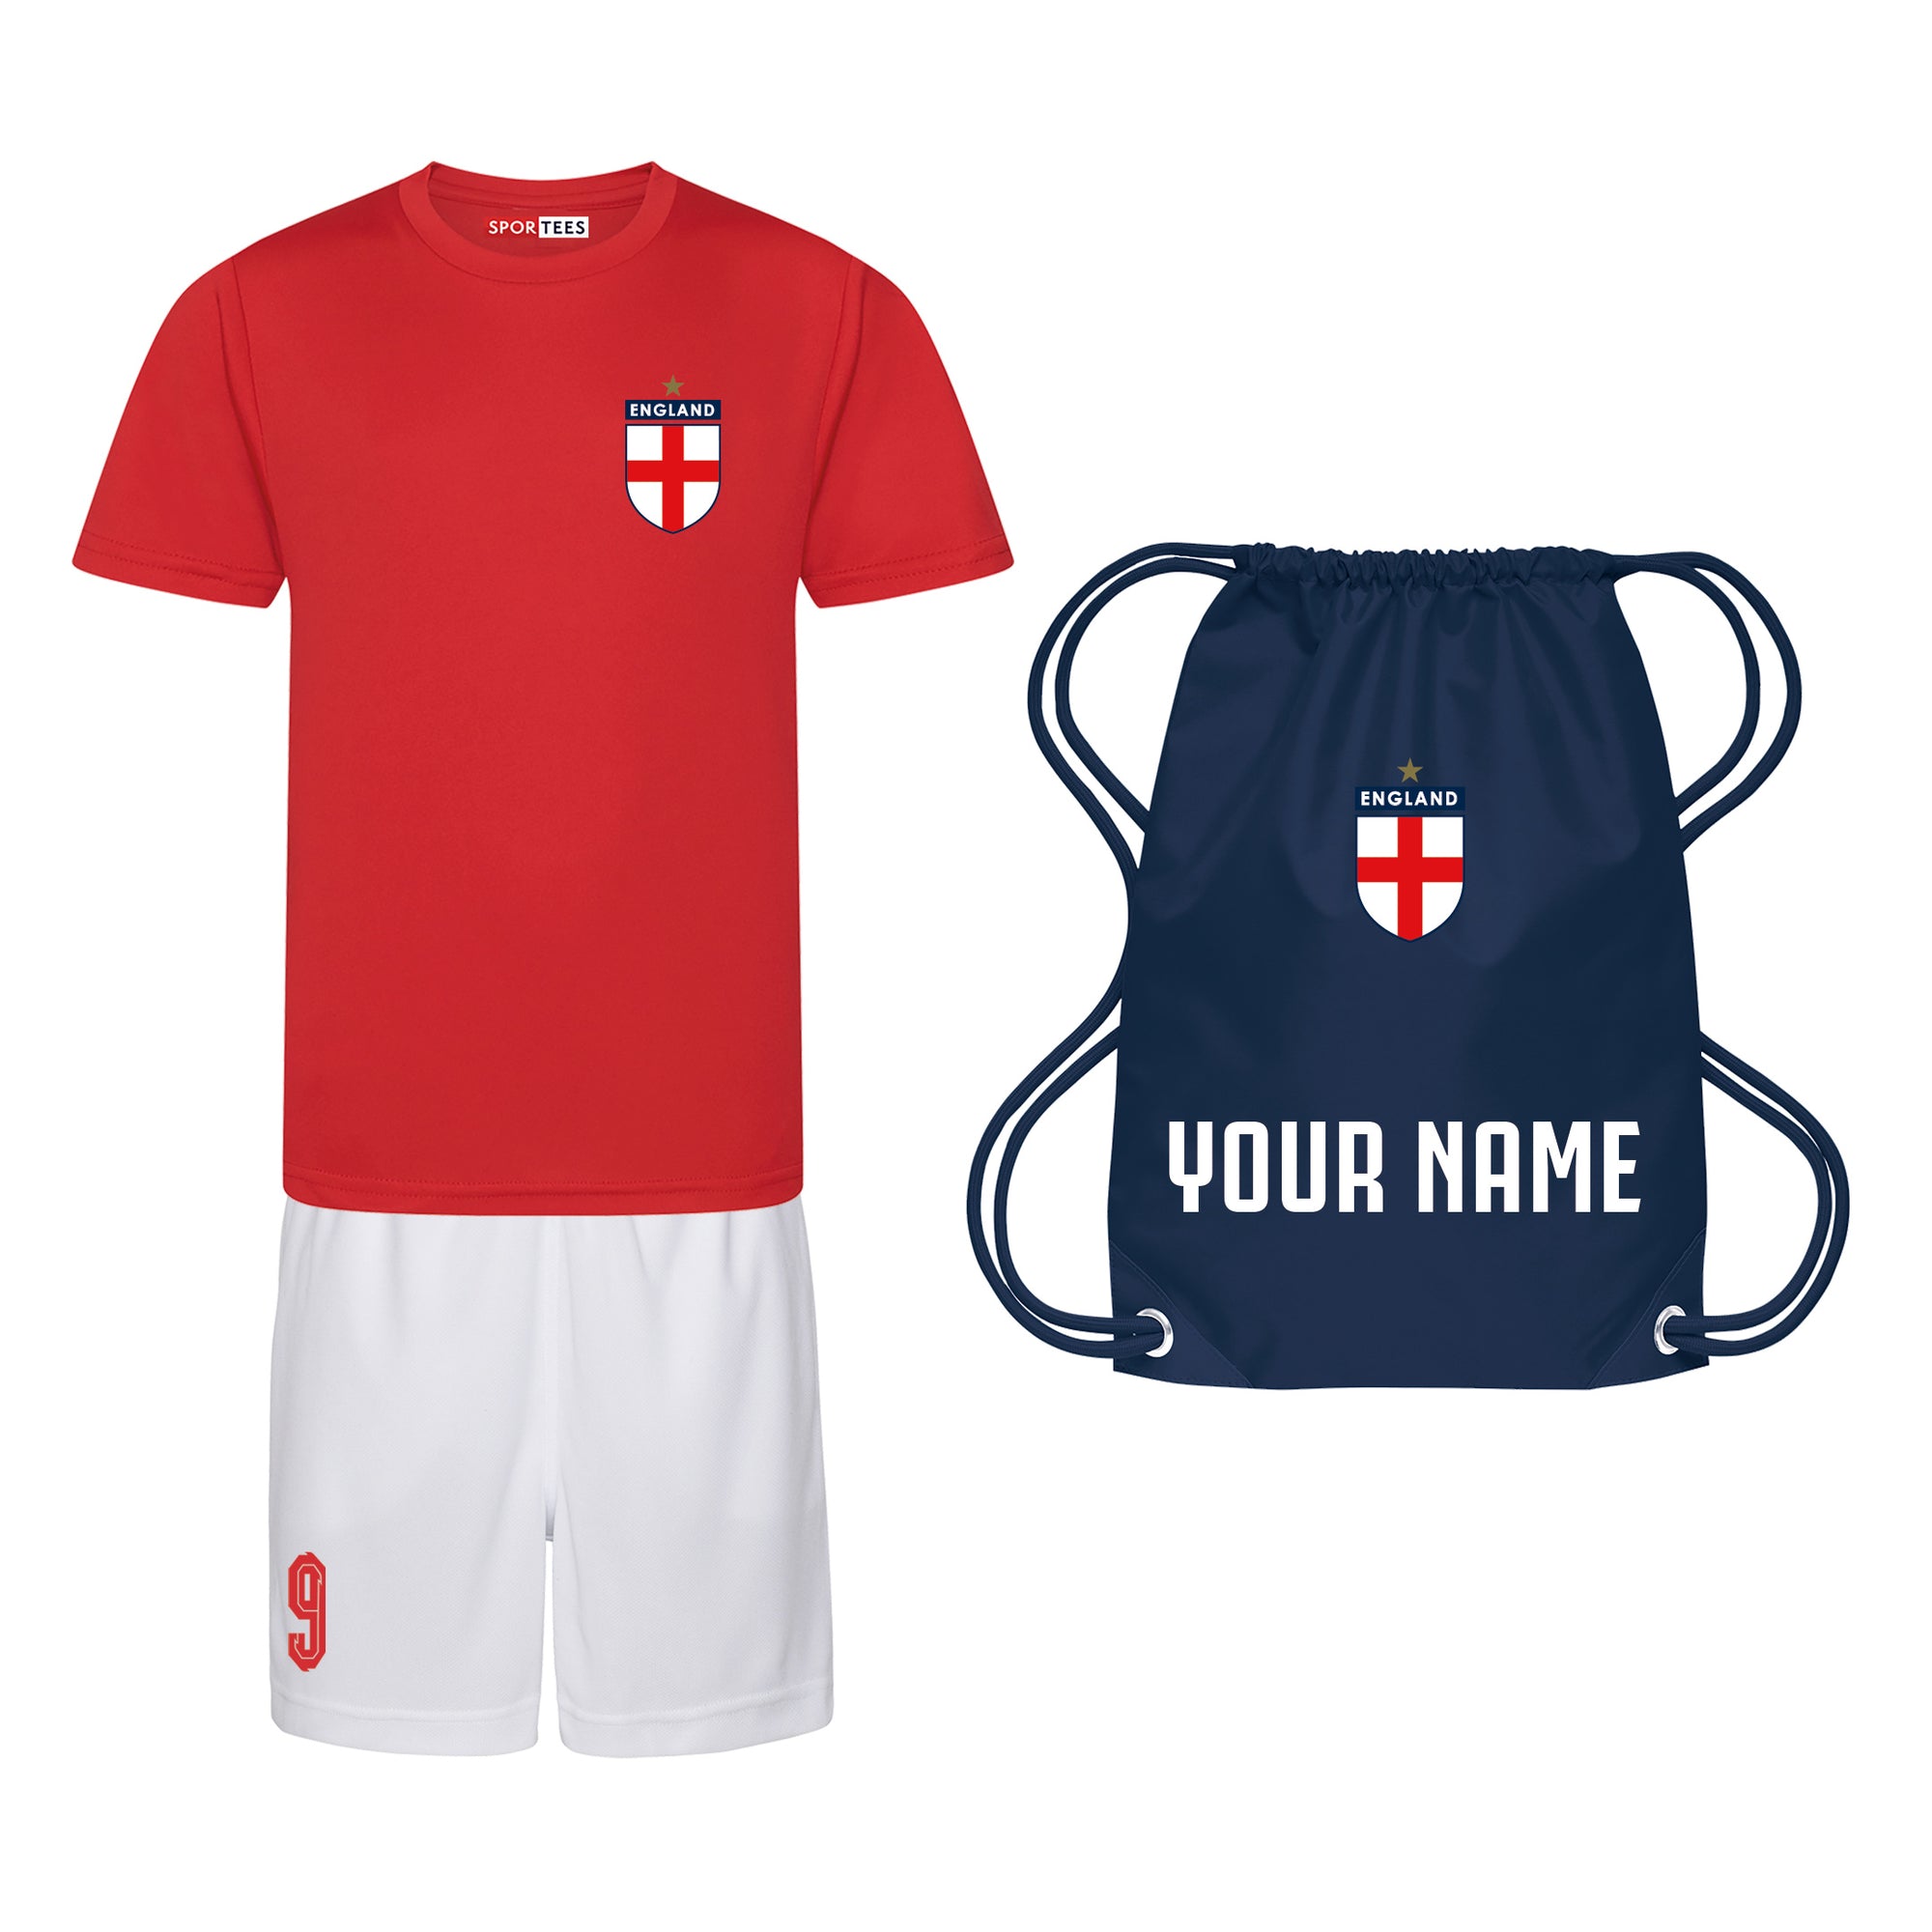 Personalised England Style Red, White & Blue Kit With Bag